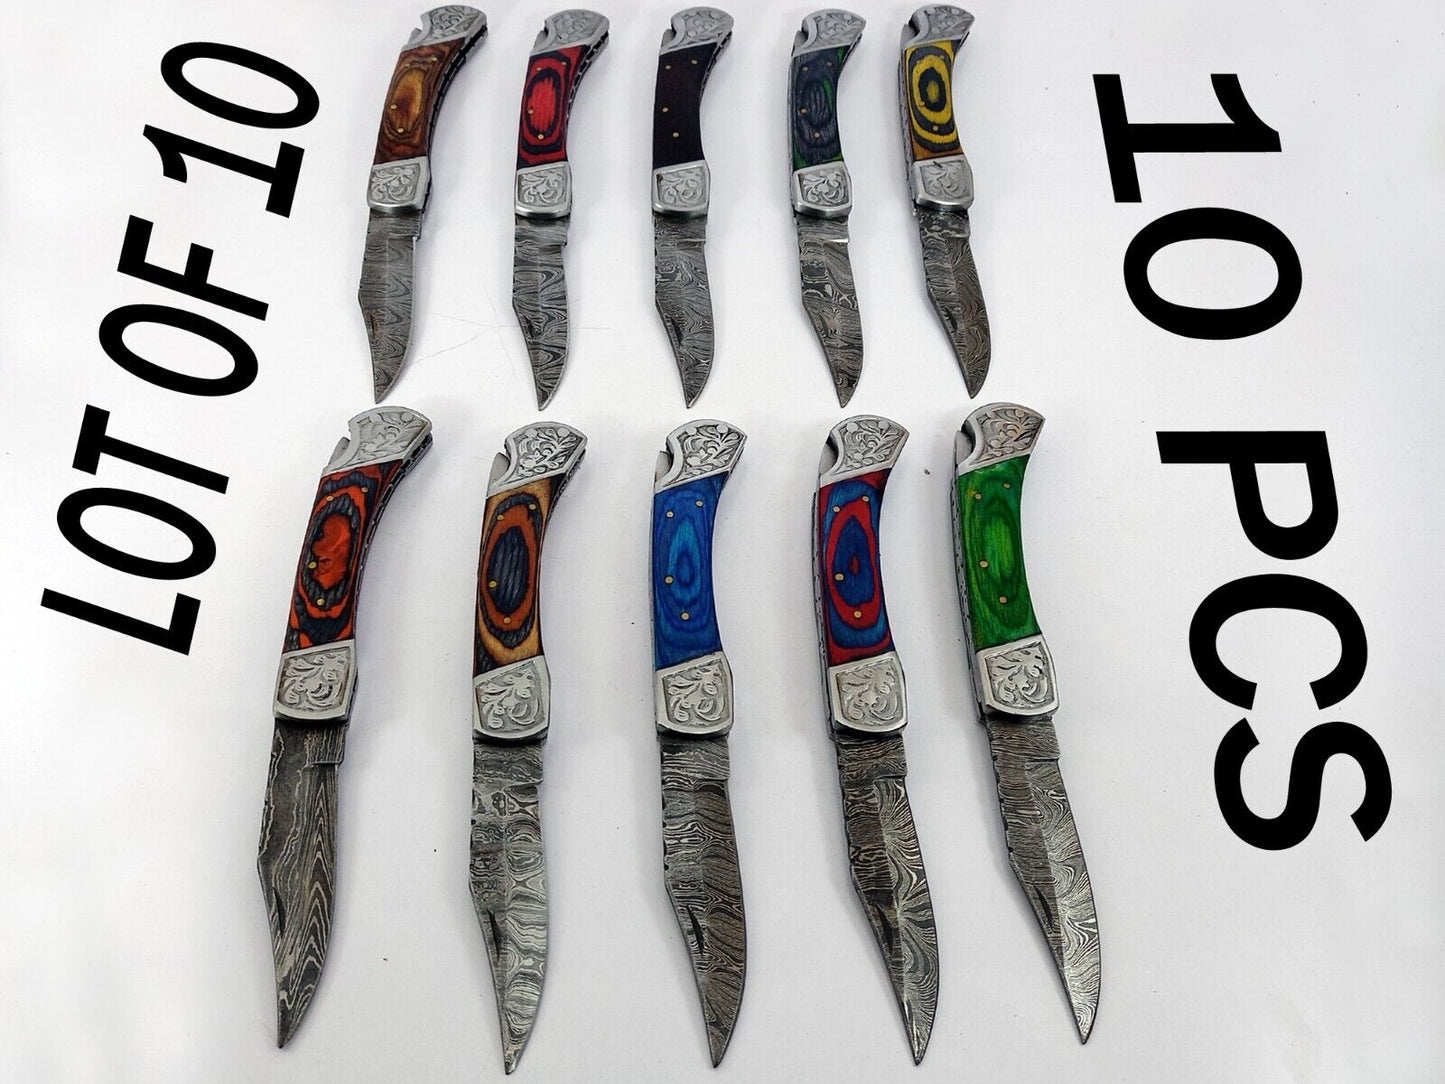 10 pieces lot of Damascus steel blade back lock folding Buck knife with Leather Sheath